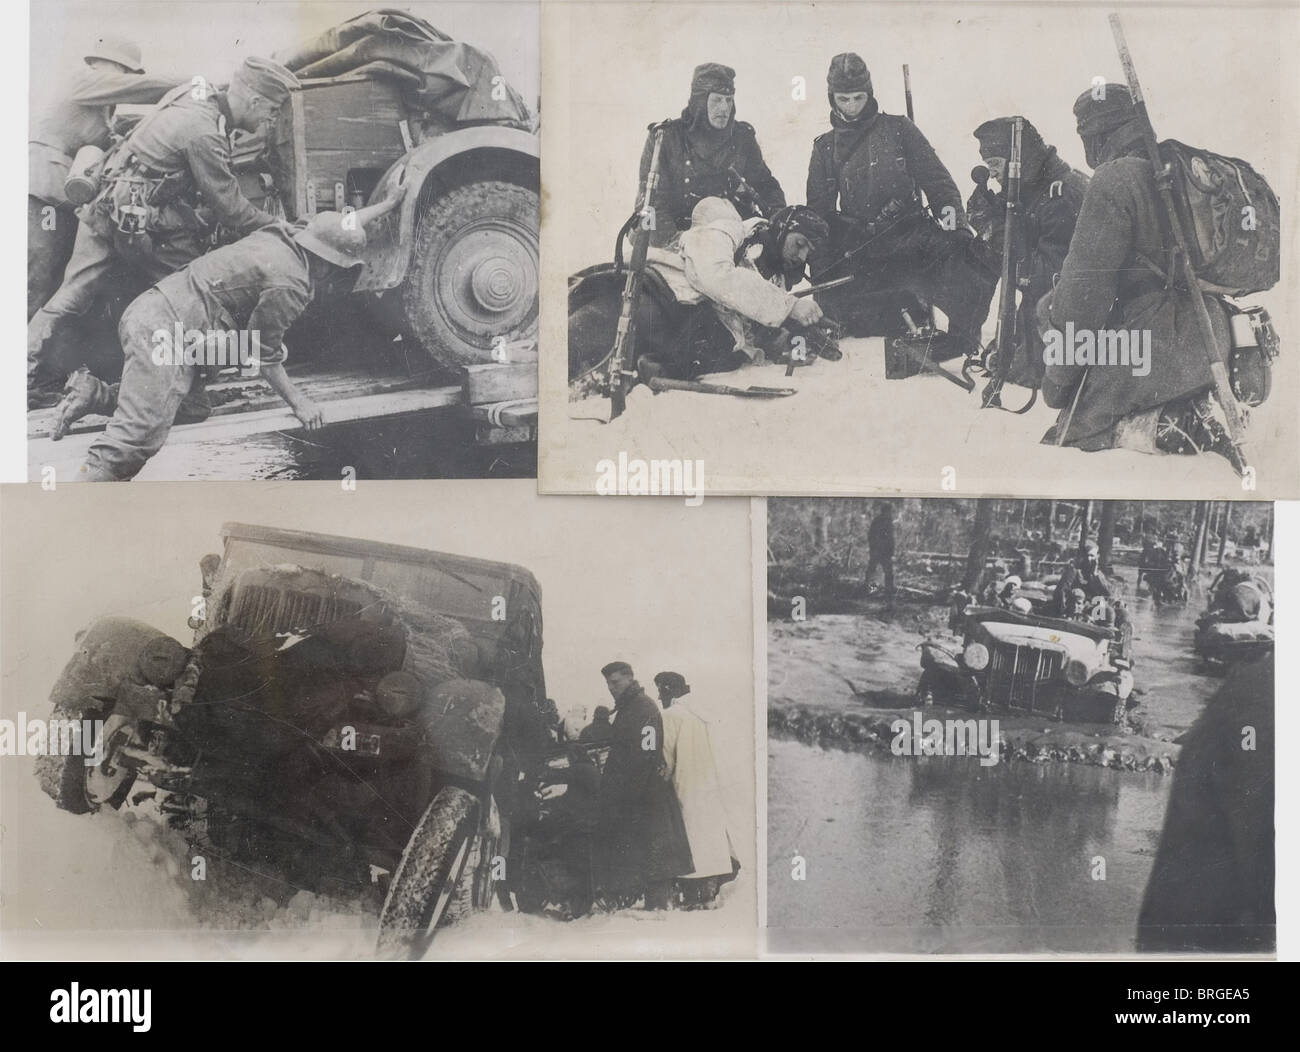 100 press photographs - Russia,period of the Second World War,the Russian Campaign Interesting photos of the Wehrmacht in battle against the Russian army. Mainly pictures of the exhausting advance in Russia,showing a multitude of vehicles. From the break-up of a contemporary photo archive. Almost all photographs are inscribed in detail. Few duplicates. Mostly unpublished.,historic,historical,people,1930s,20th century,Wehrmacht,armed forces,army,NS,National Socialism,Nazism,Third Reich,German Reich,Germany,object,objects,stills,clipping,cli,Additional-Rights-Clearences-Not Available Stock Photo